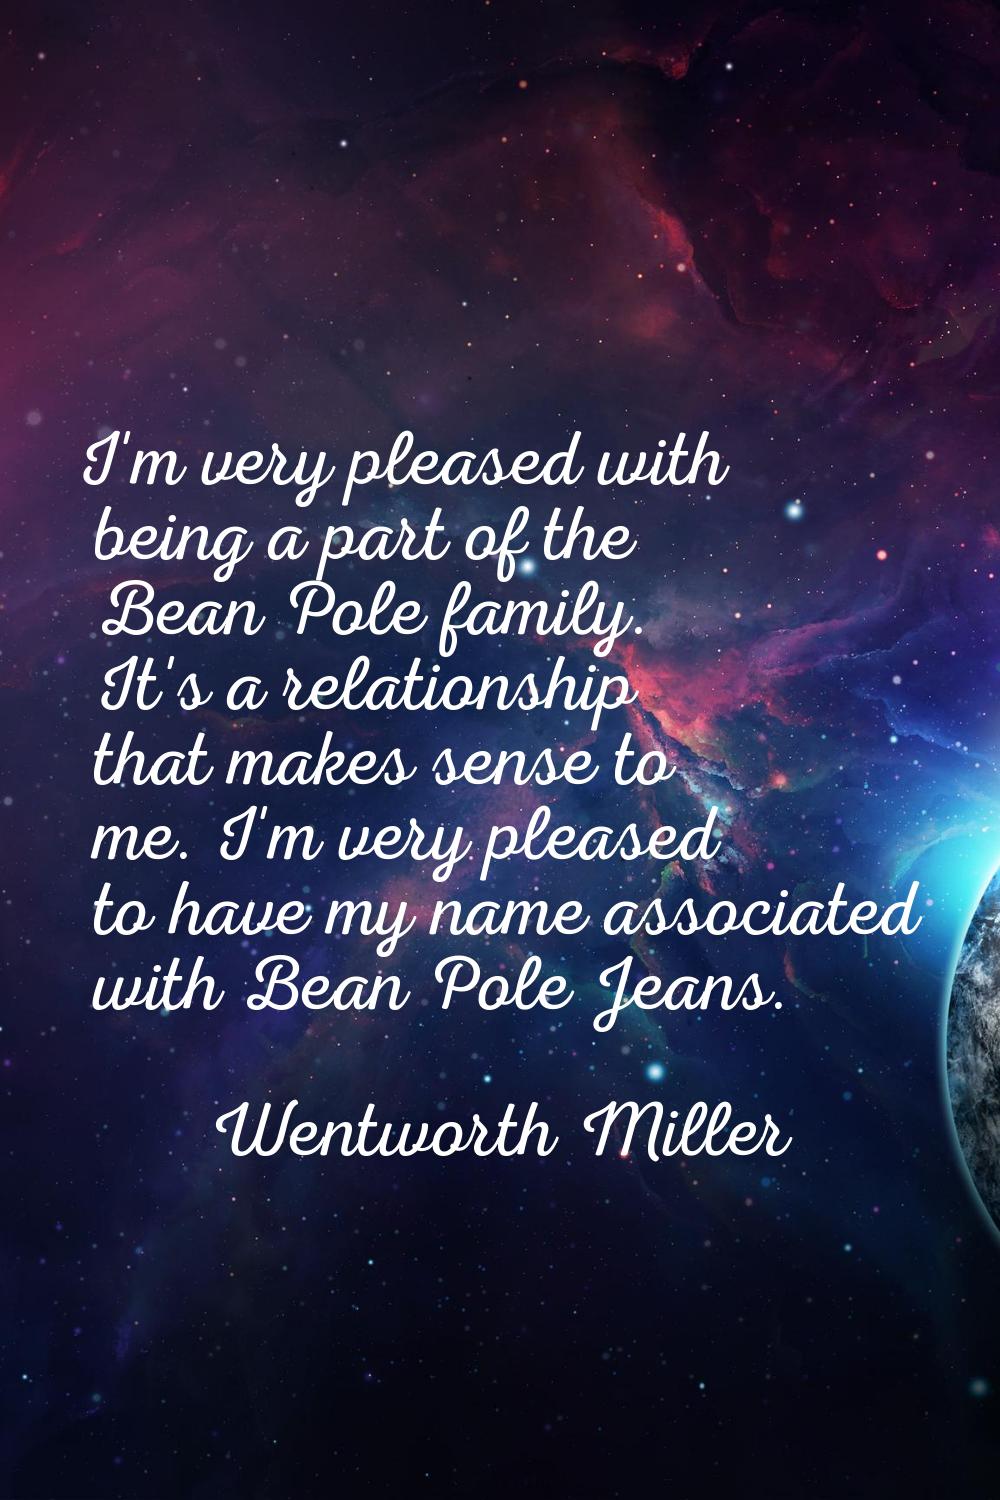 I'm very pleased with being a part of the Bean Pole family. It's a relationship that makes sense to